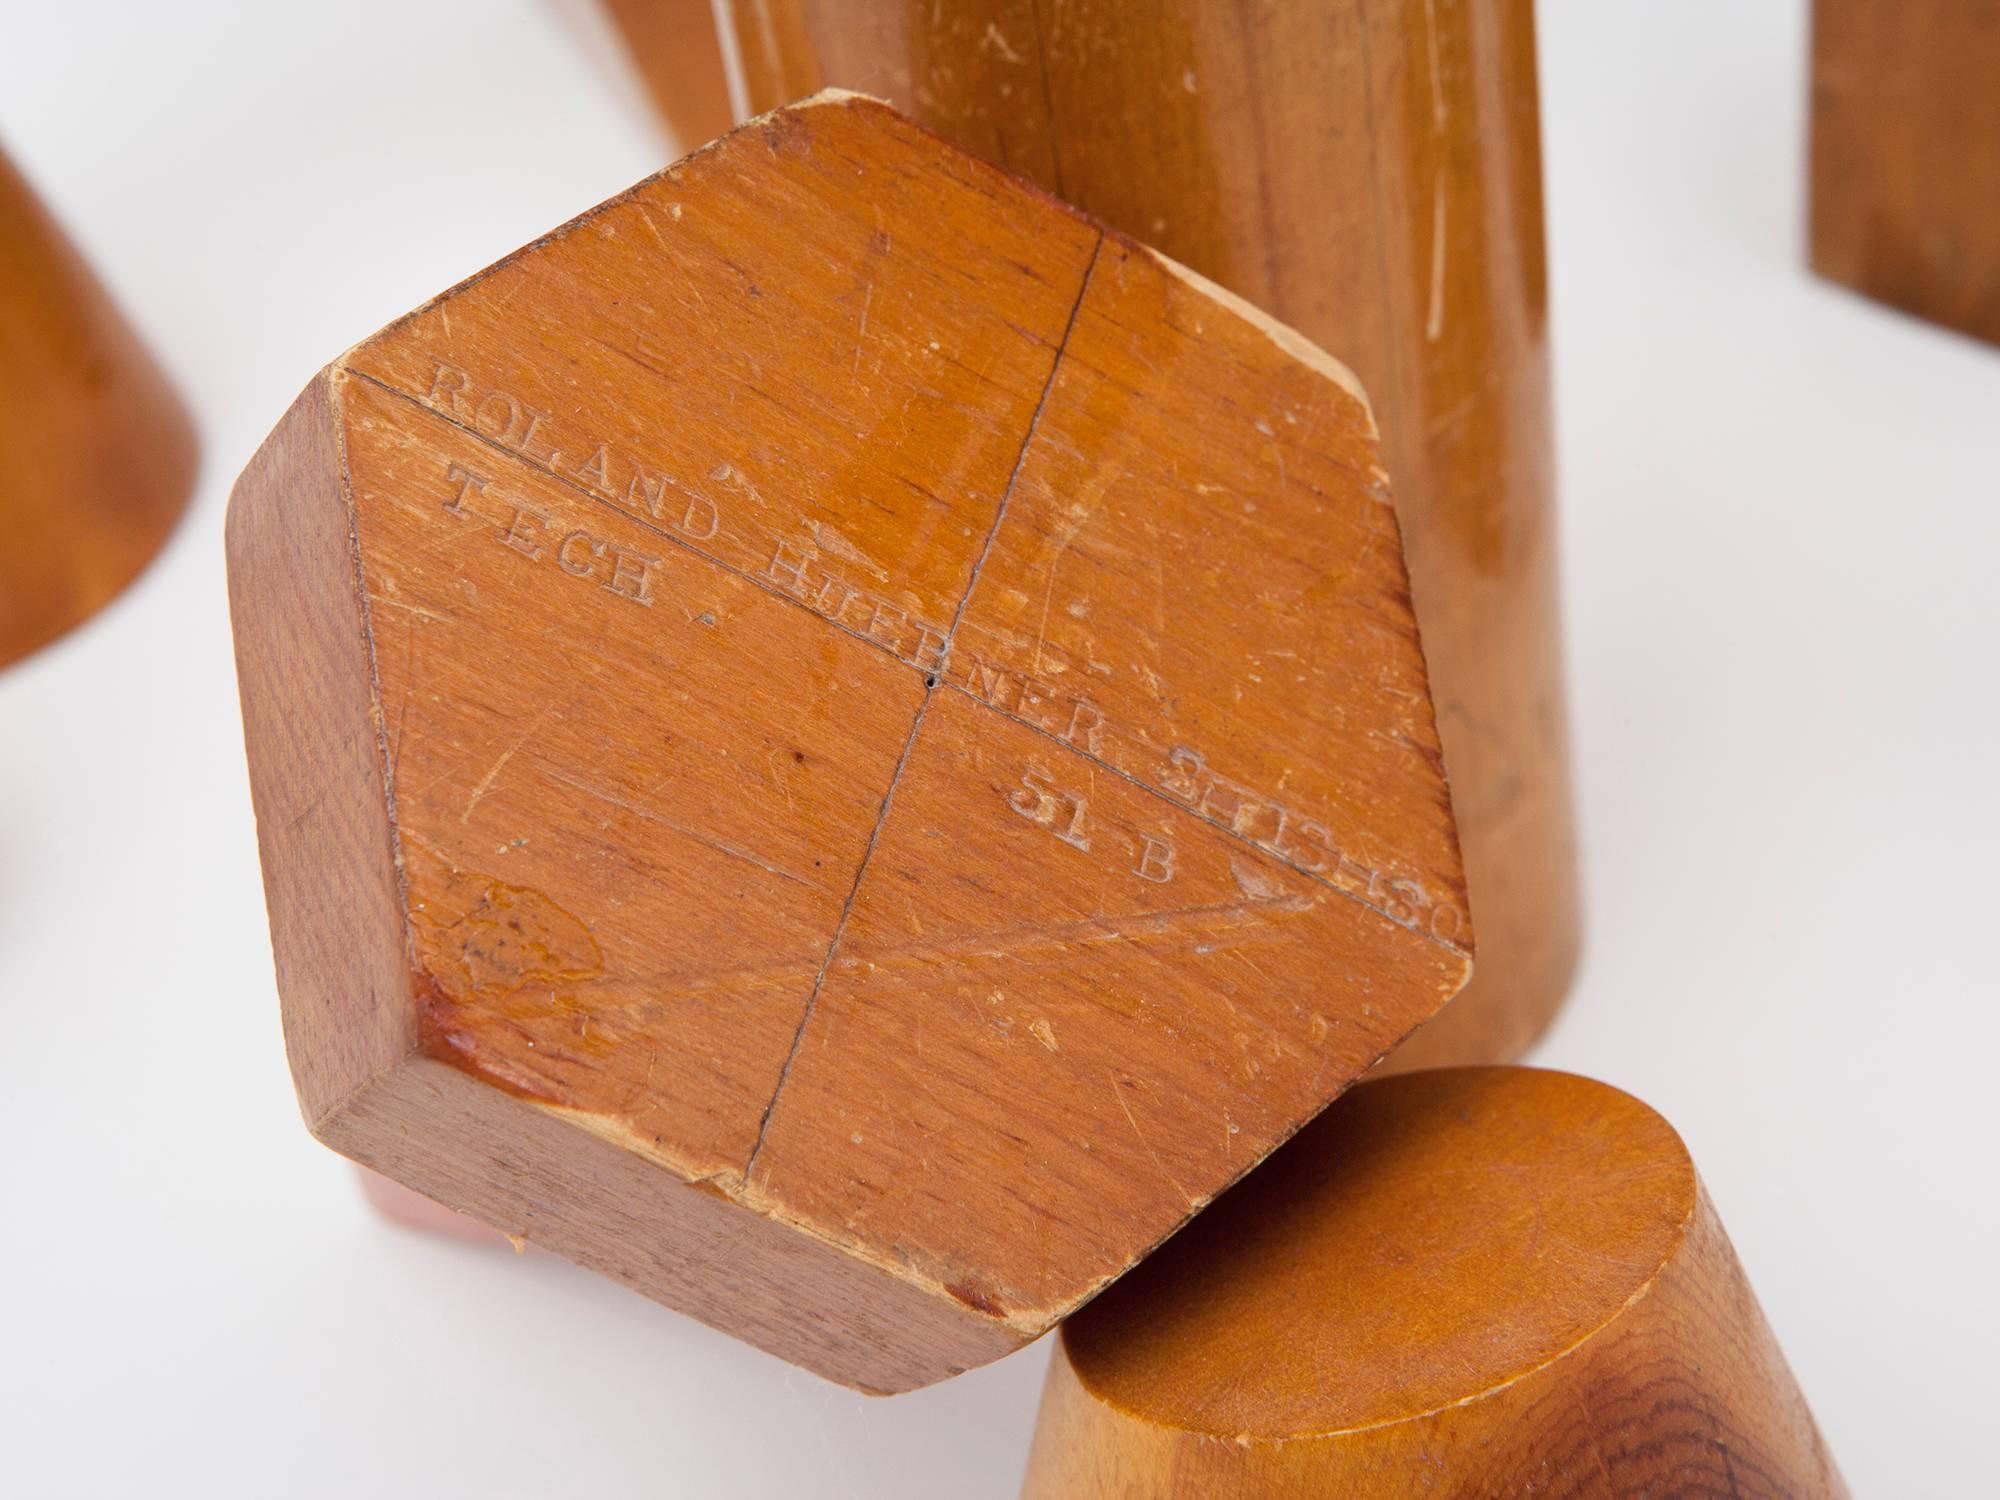 Set of 18 wooden blocks from pre-war Germany, in a variety of shapes, sizes, and colors.